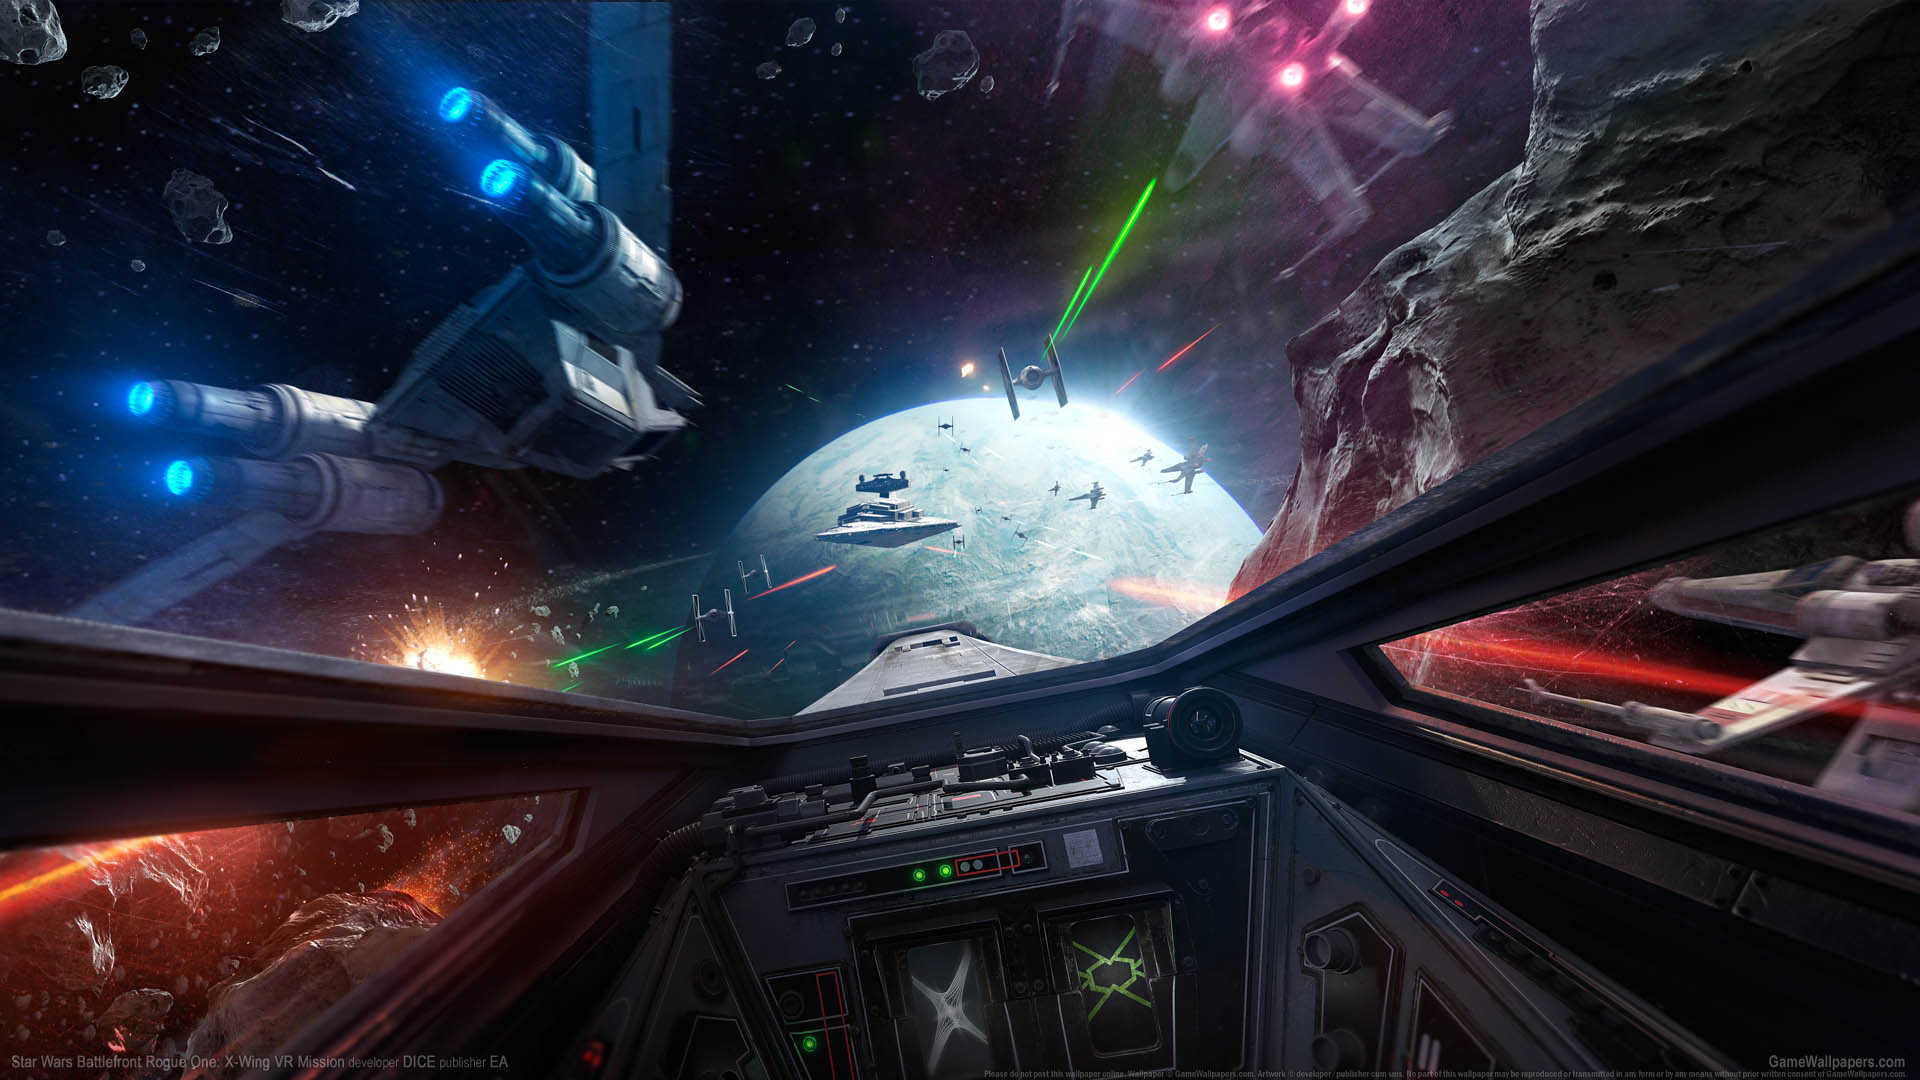 Star Wars Battlefront Rogue One: X-Wing VR Mission wallpaper 01 1920x1080